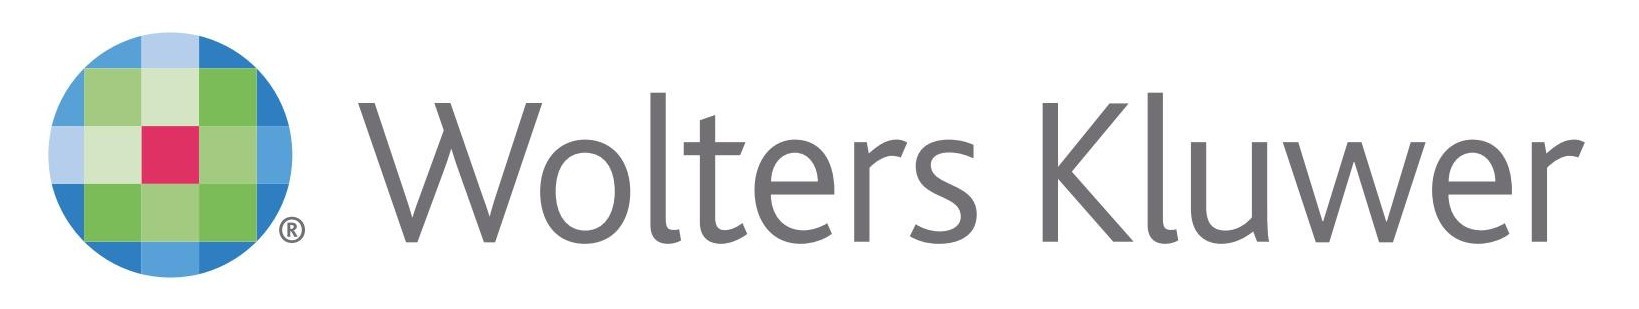 Image result for wolters kluwer logo clip art